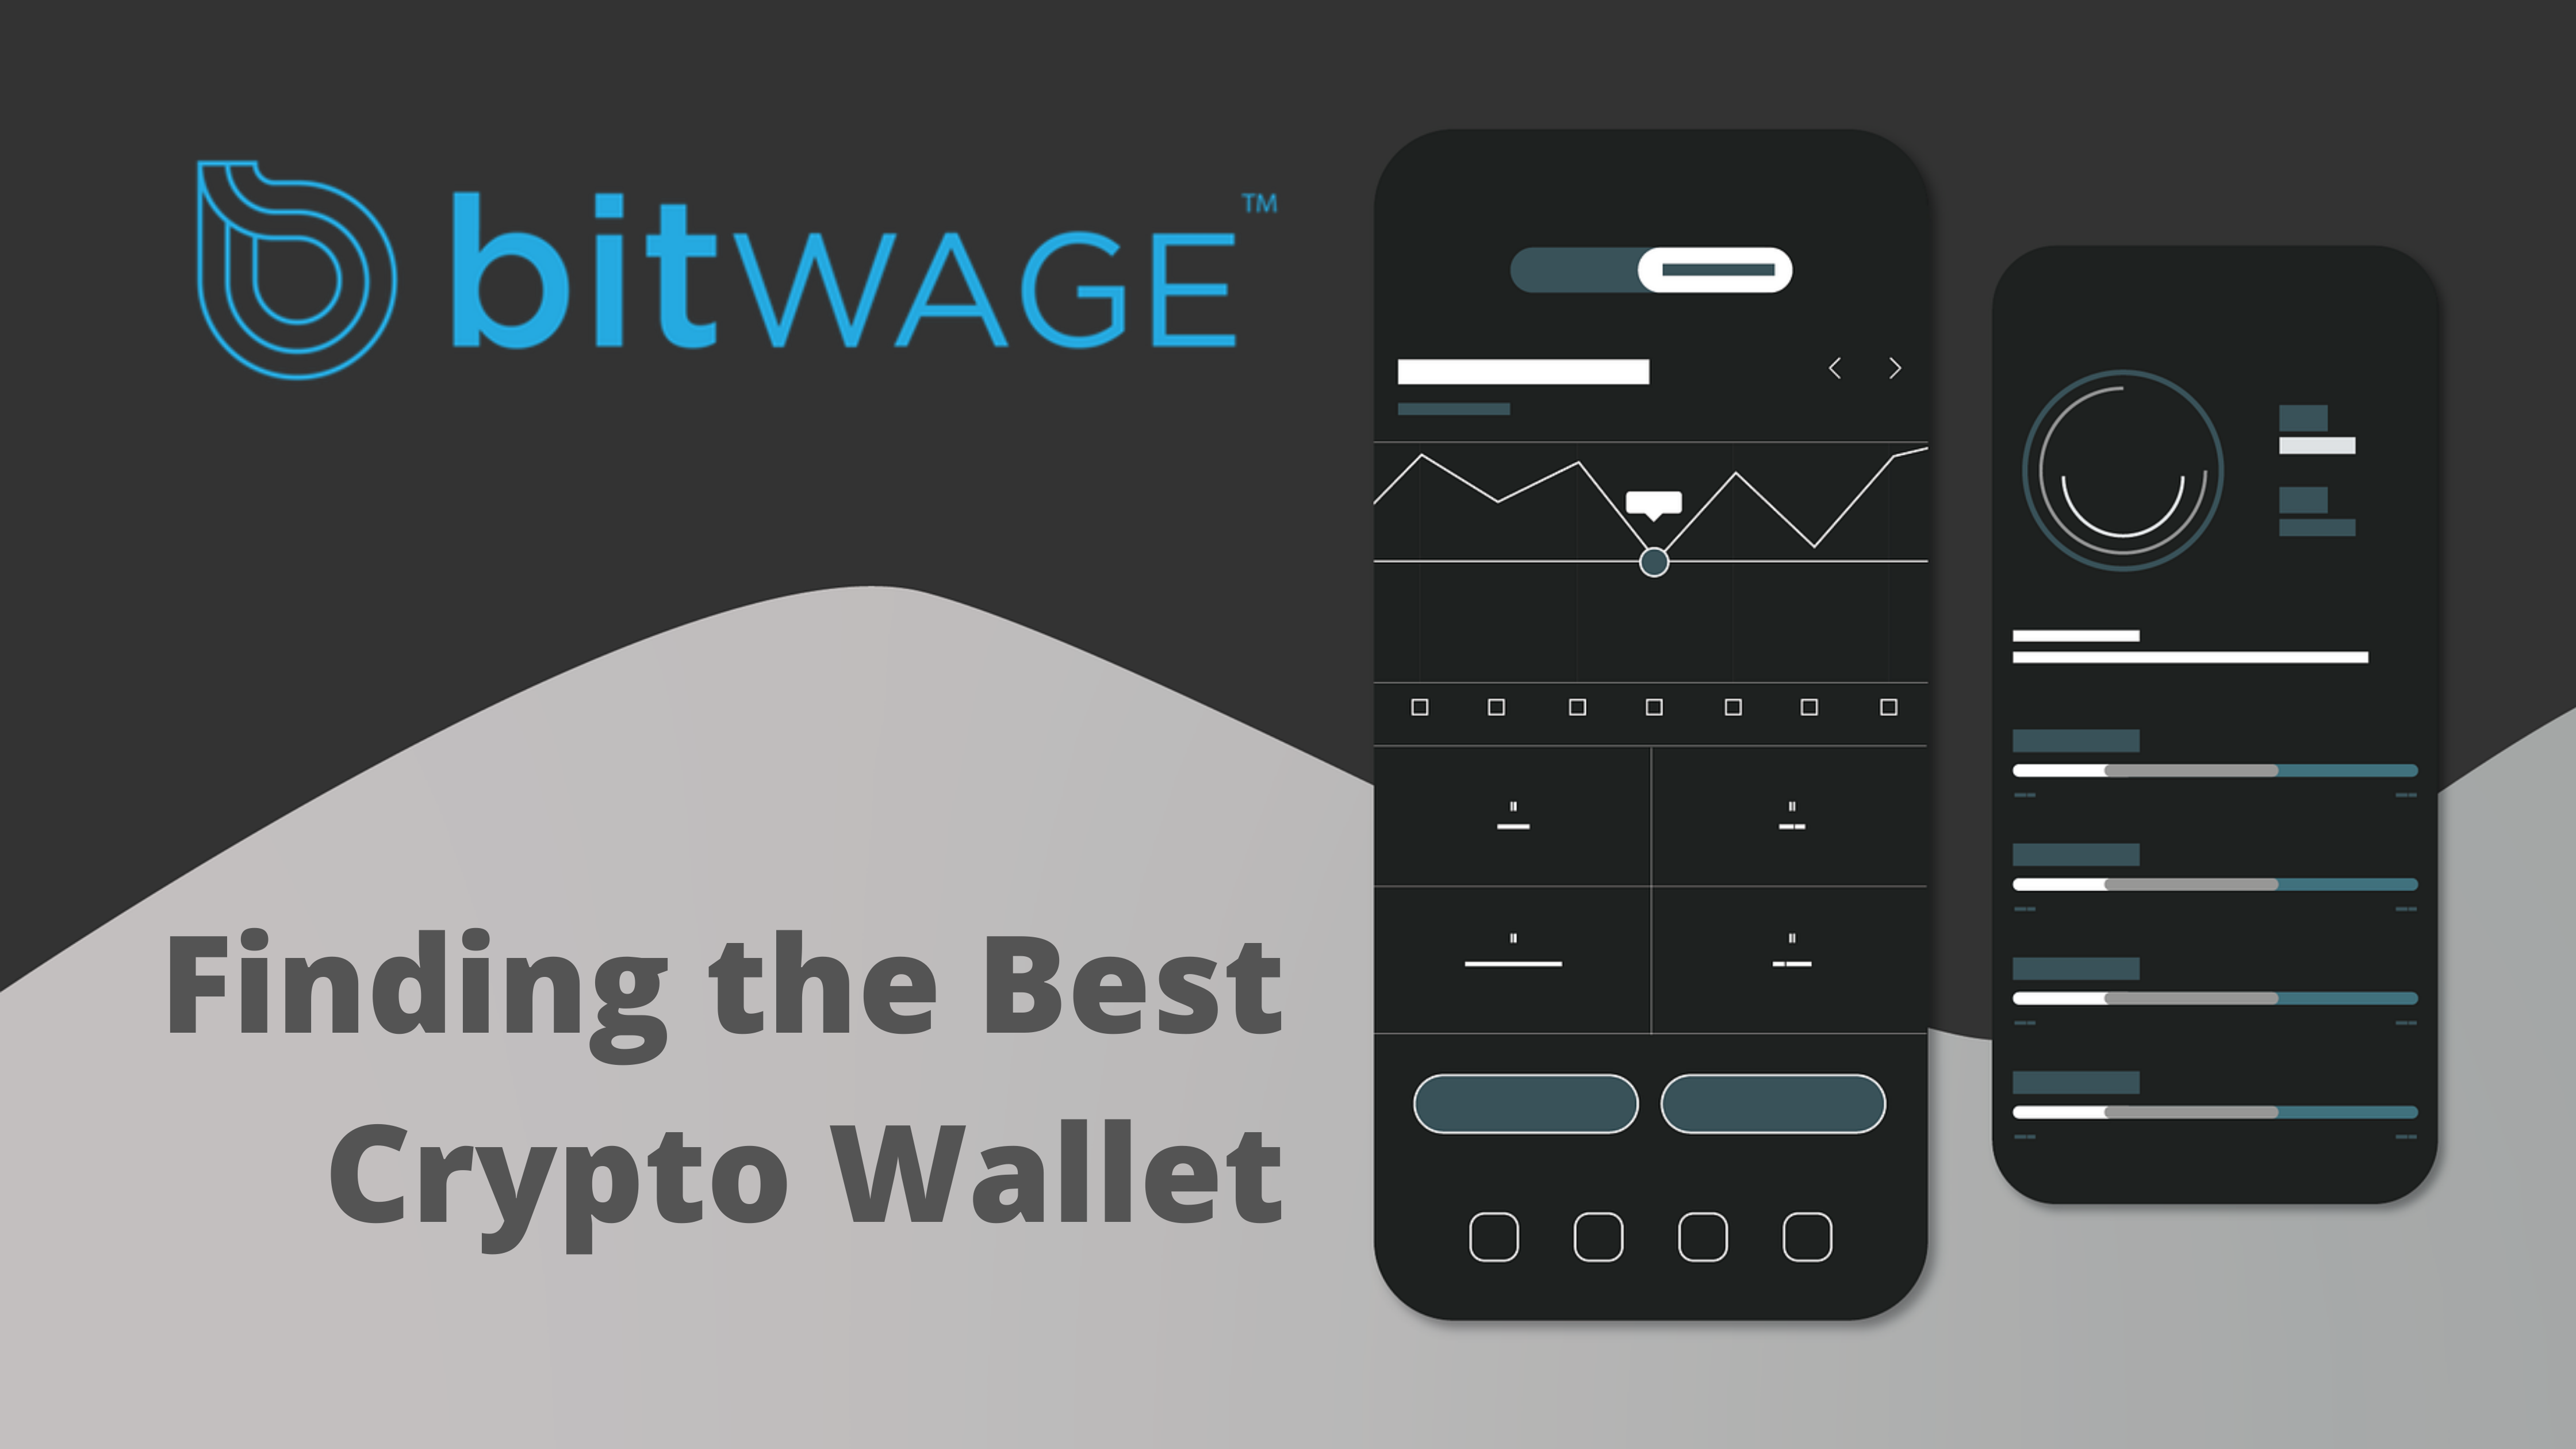 The Only Guide You Need to Find the Best Crypto Wallet